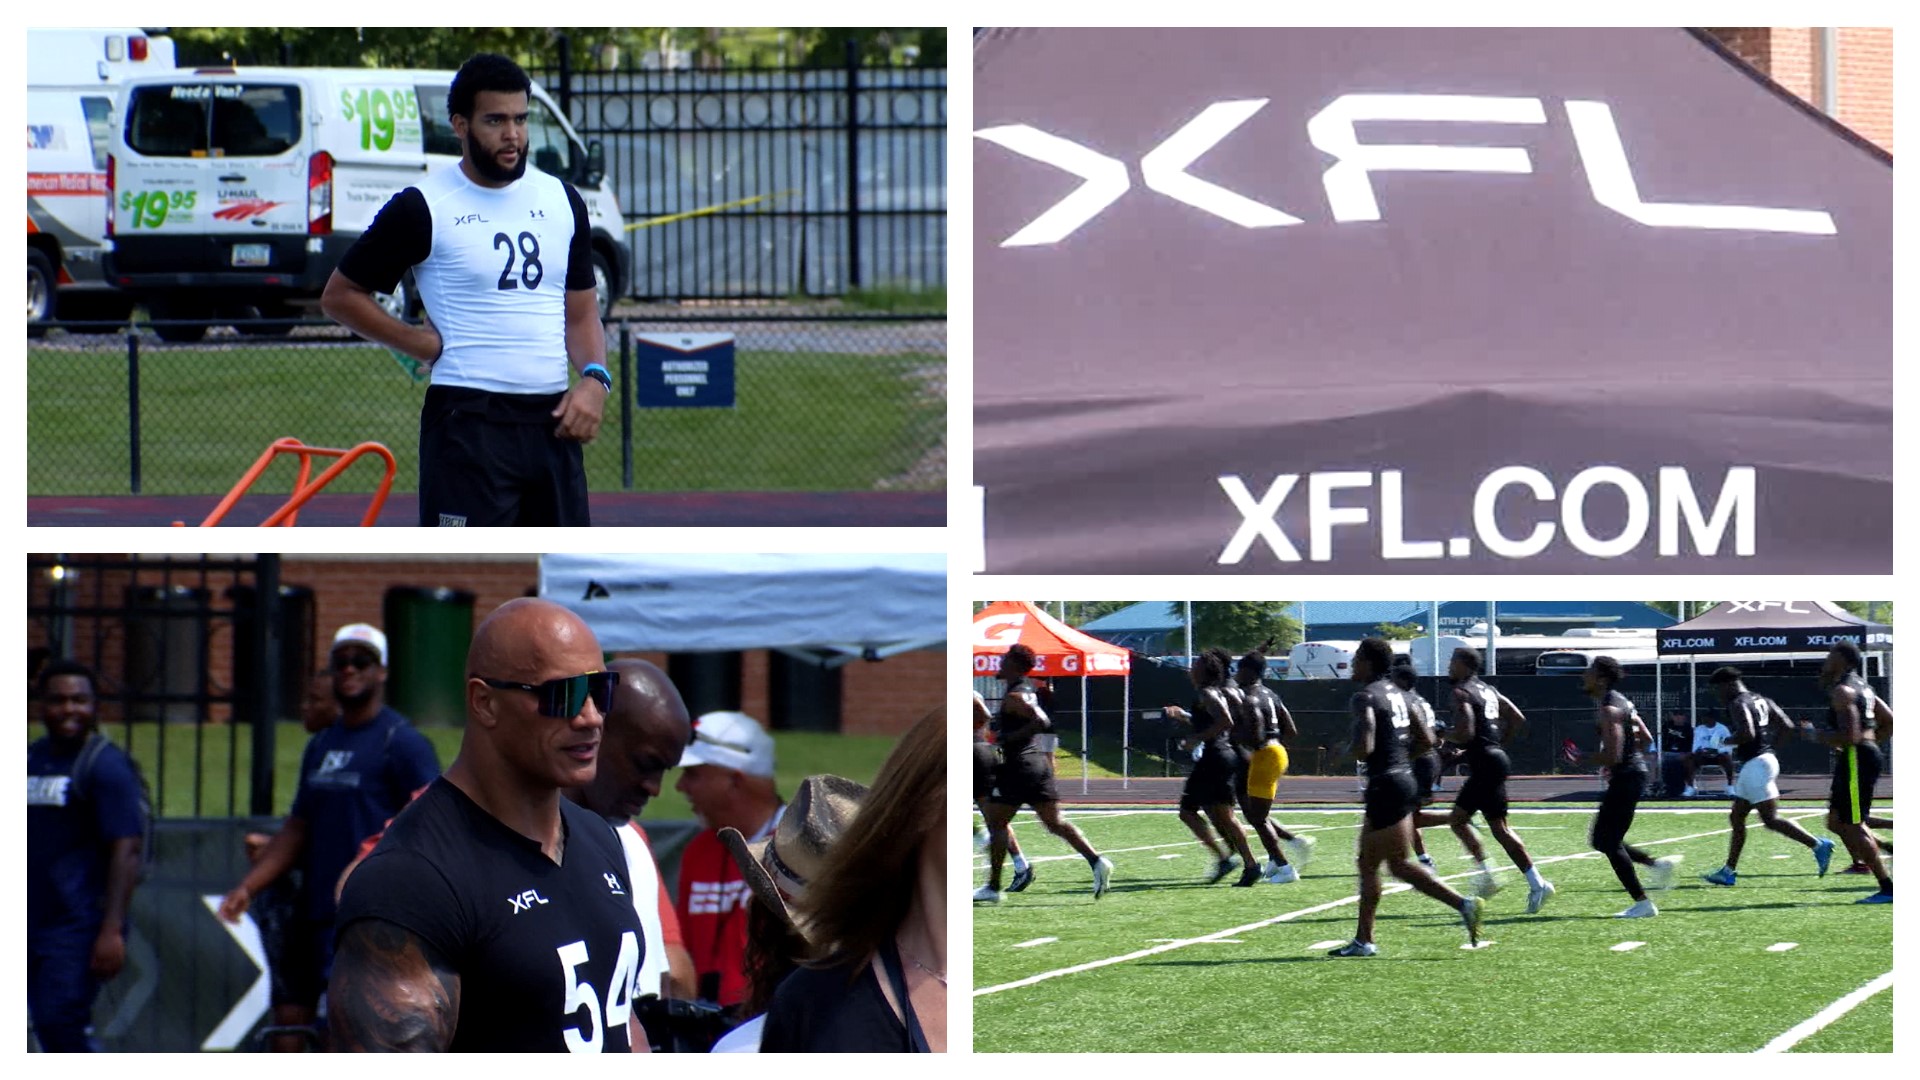 Former Alabama A&M QB Aqeel Glass and several other former HBCU standouts took part in the XFL HBCU Showcase in Jackson, Mississippi.